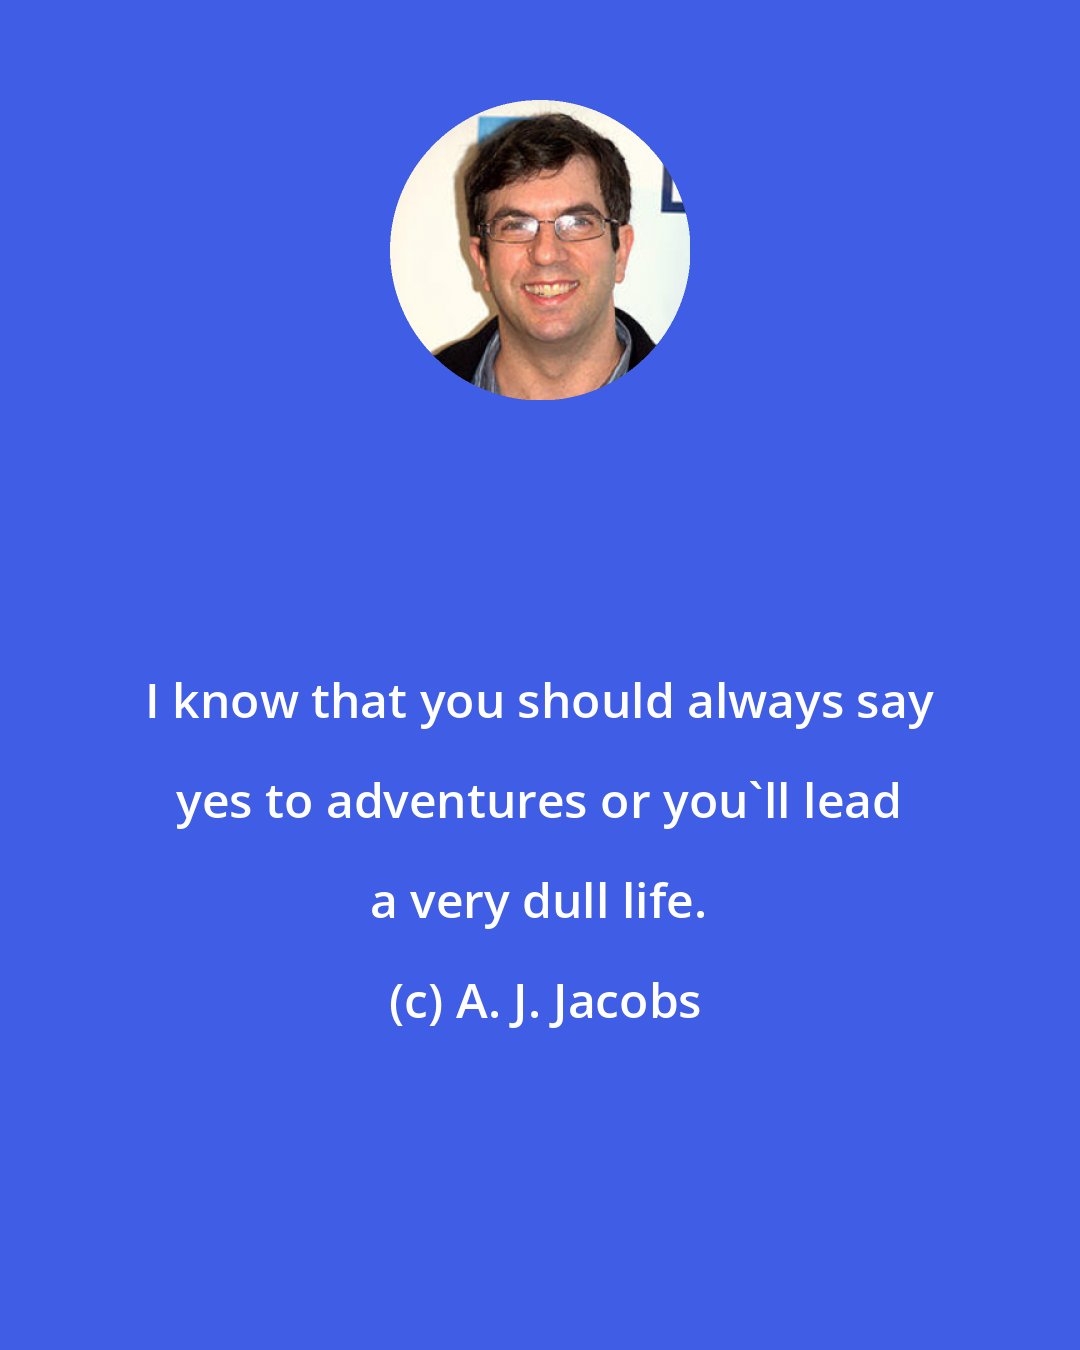 A. J. Jacobs: I know that you should always say yes to adventures or you'll lead a very dull life.